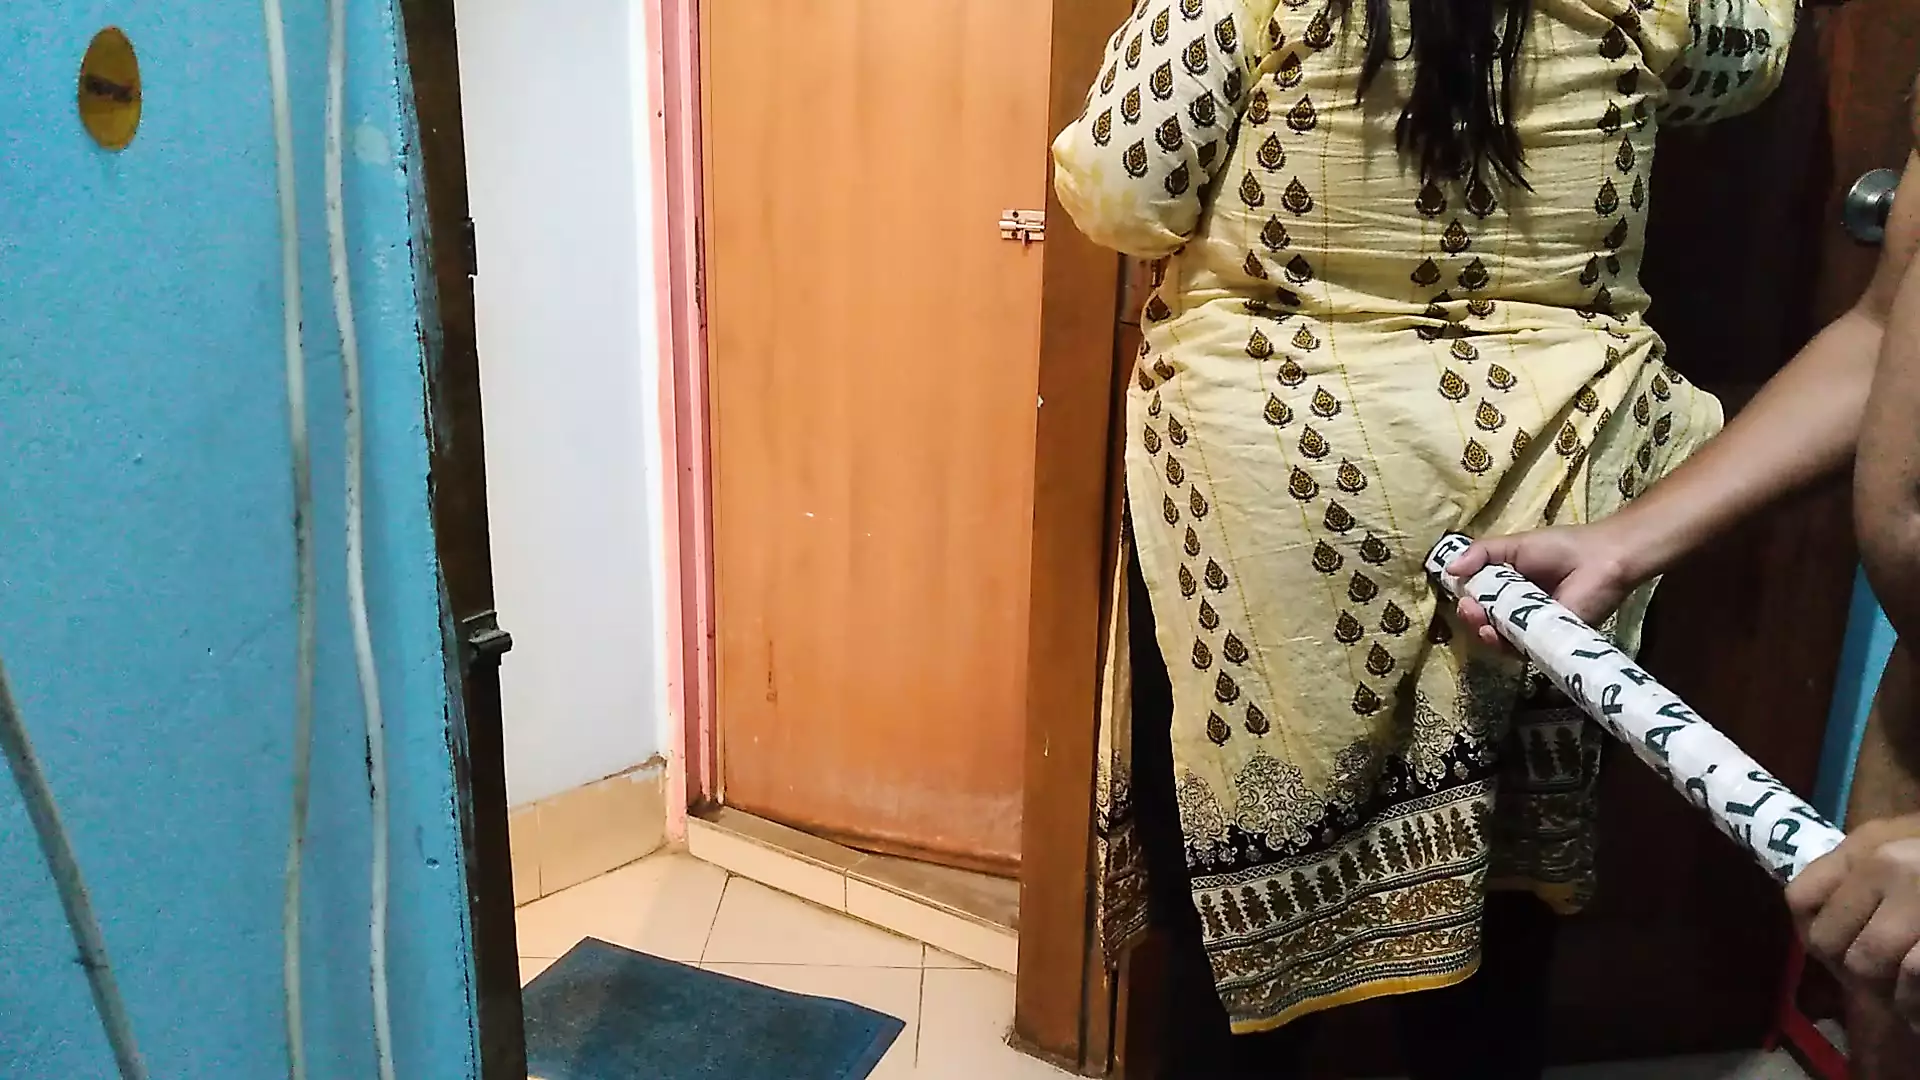 Indian Aunty Sex Vedio 40 Year - Neighbor Fucks Tamil Hot Aunty While Sweeping the House - Indian Sex |  xHamster